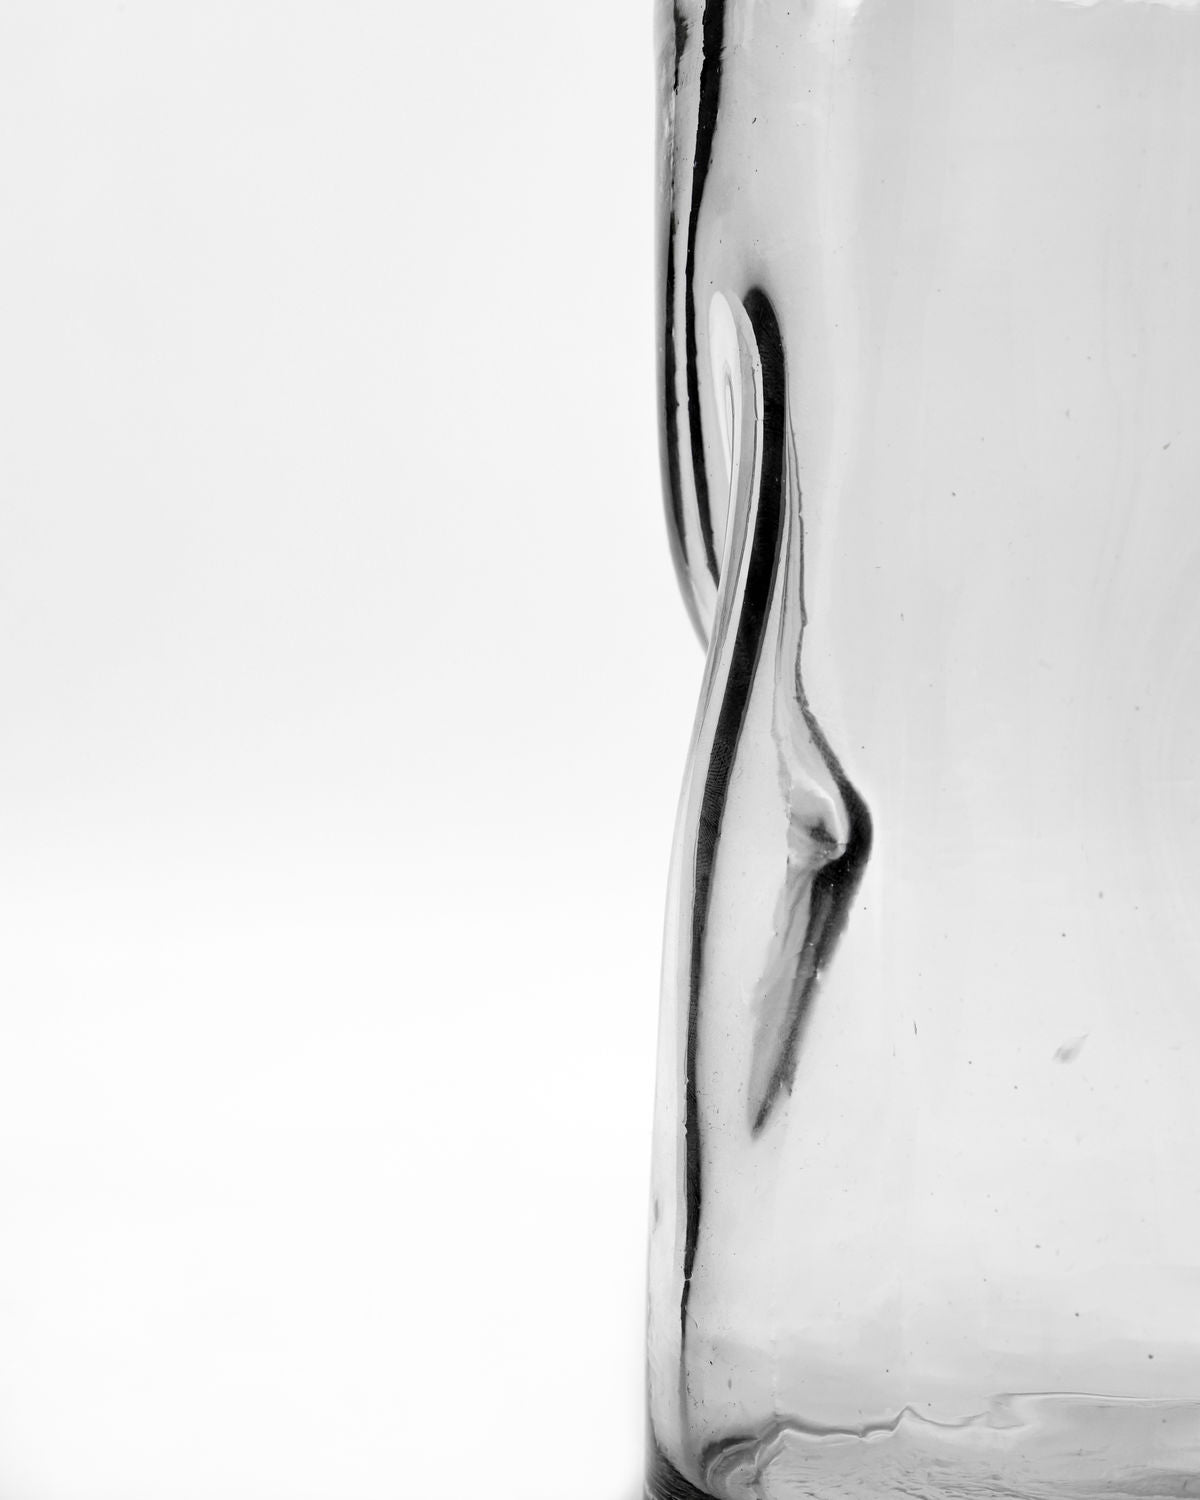 Clear Vase, clear glass